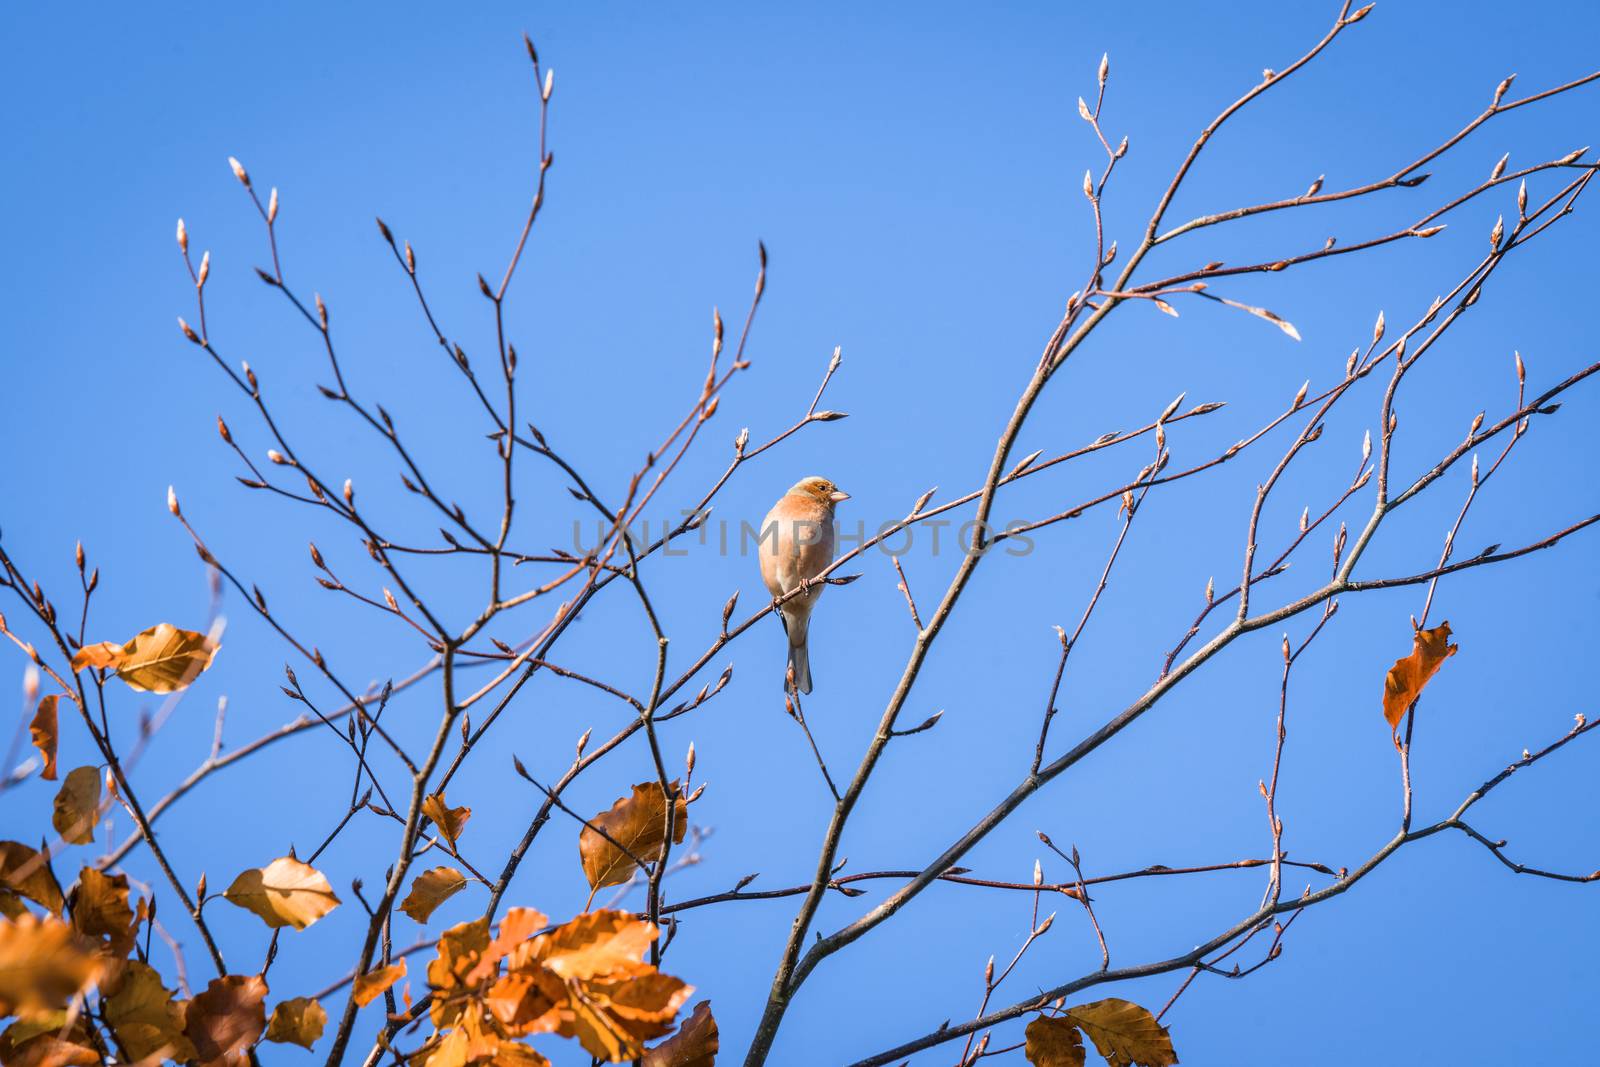 Single finch in a tree top in the fall with golden leaves in autumn colors